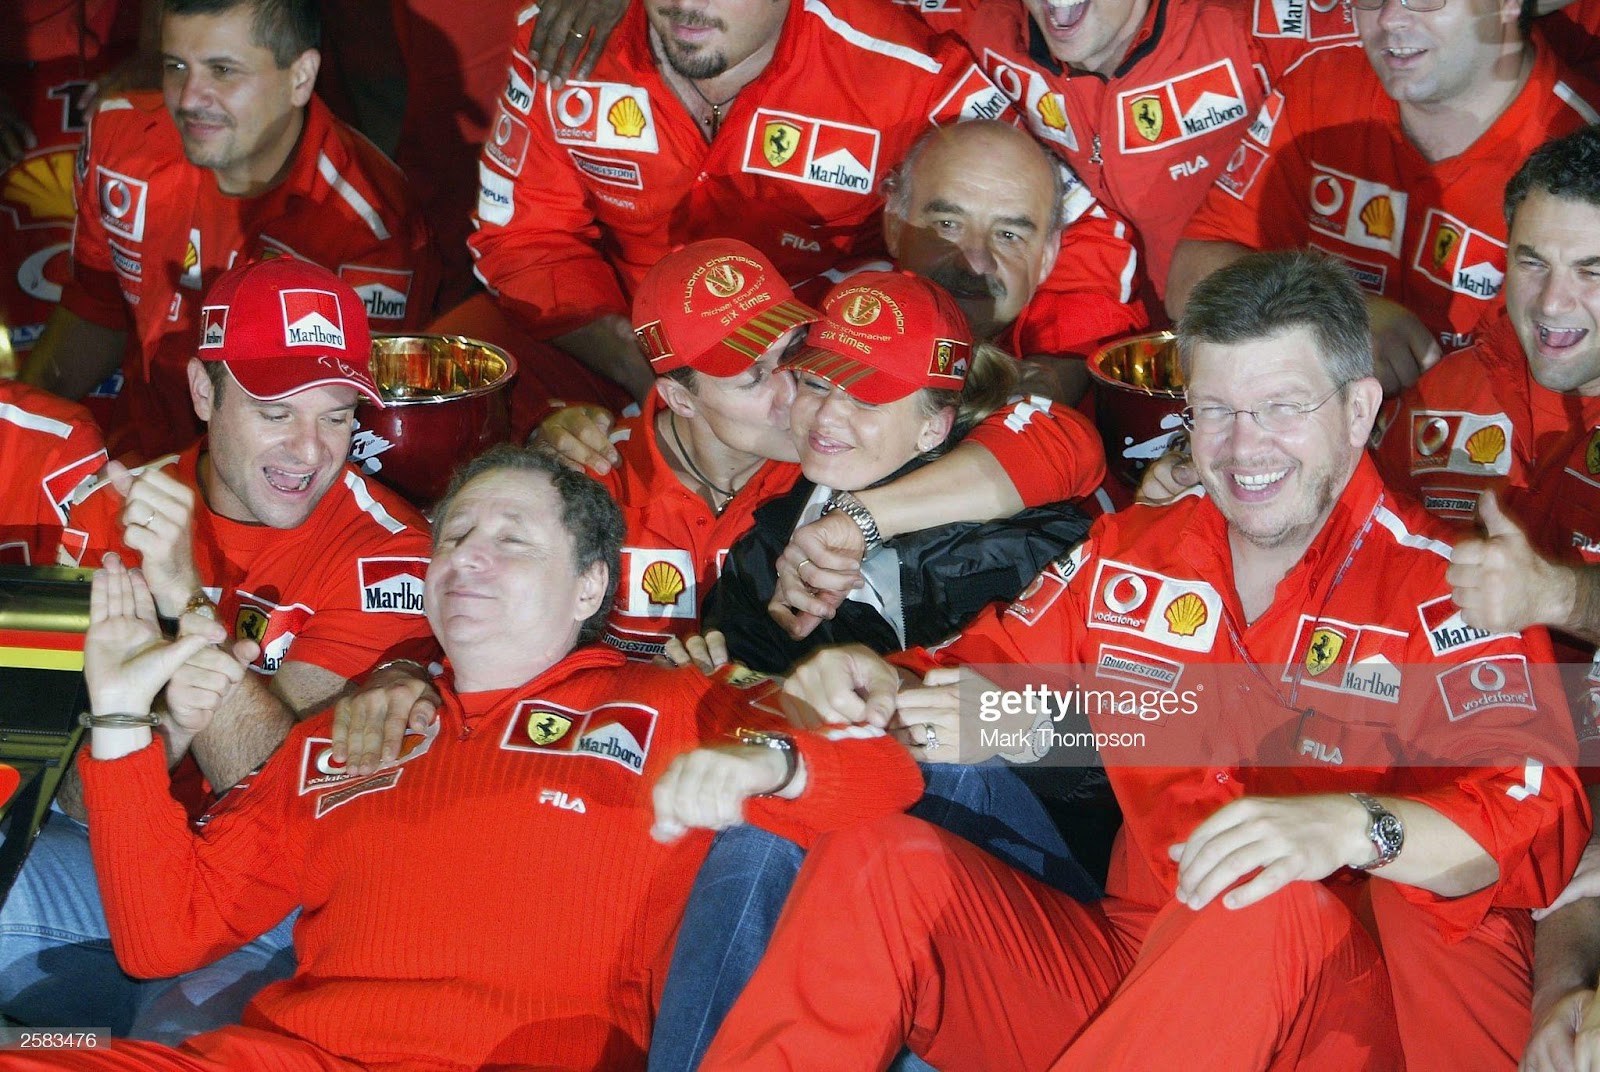 Michael Schumacher, Ferrari, poses with his wife Corinna for a celebratory team photo during the F1 Japanese Grand Prix in Suzuka on October 12, 2003.